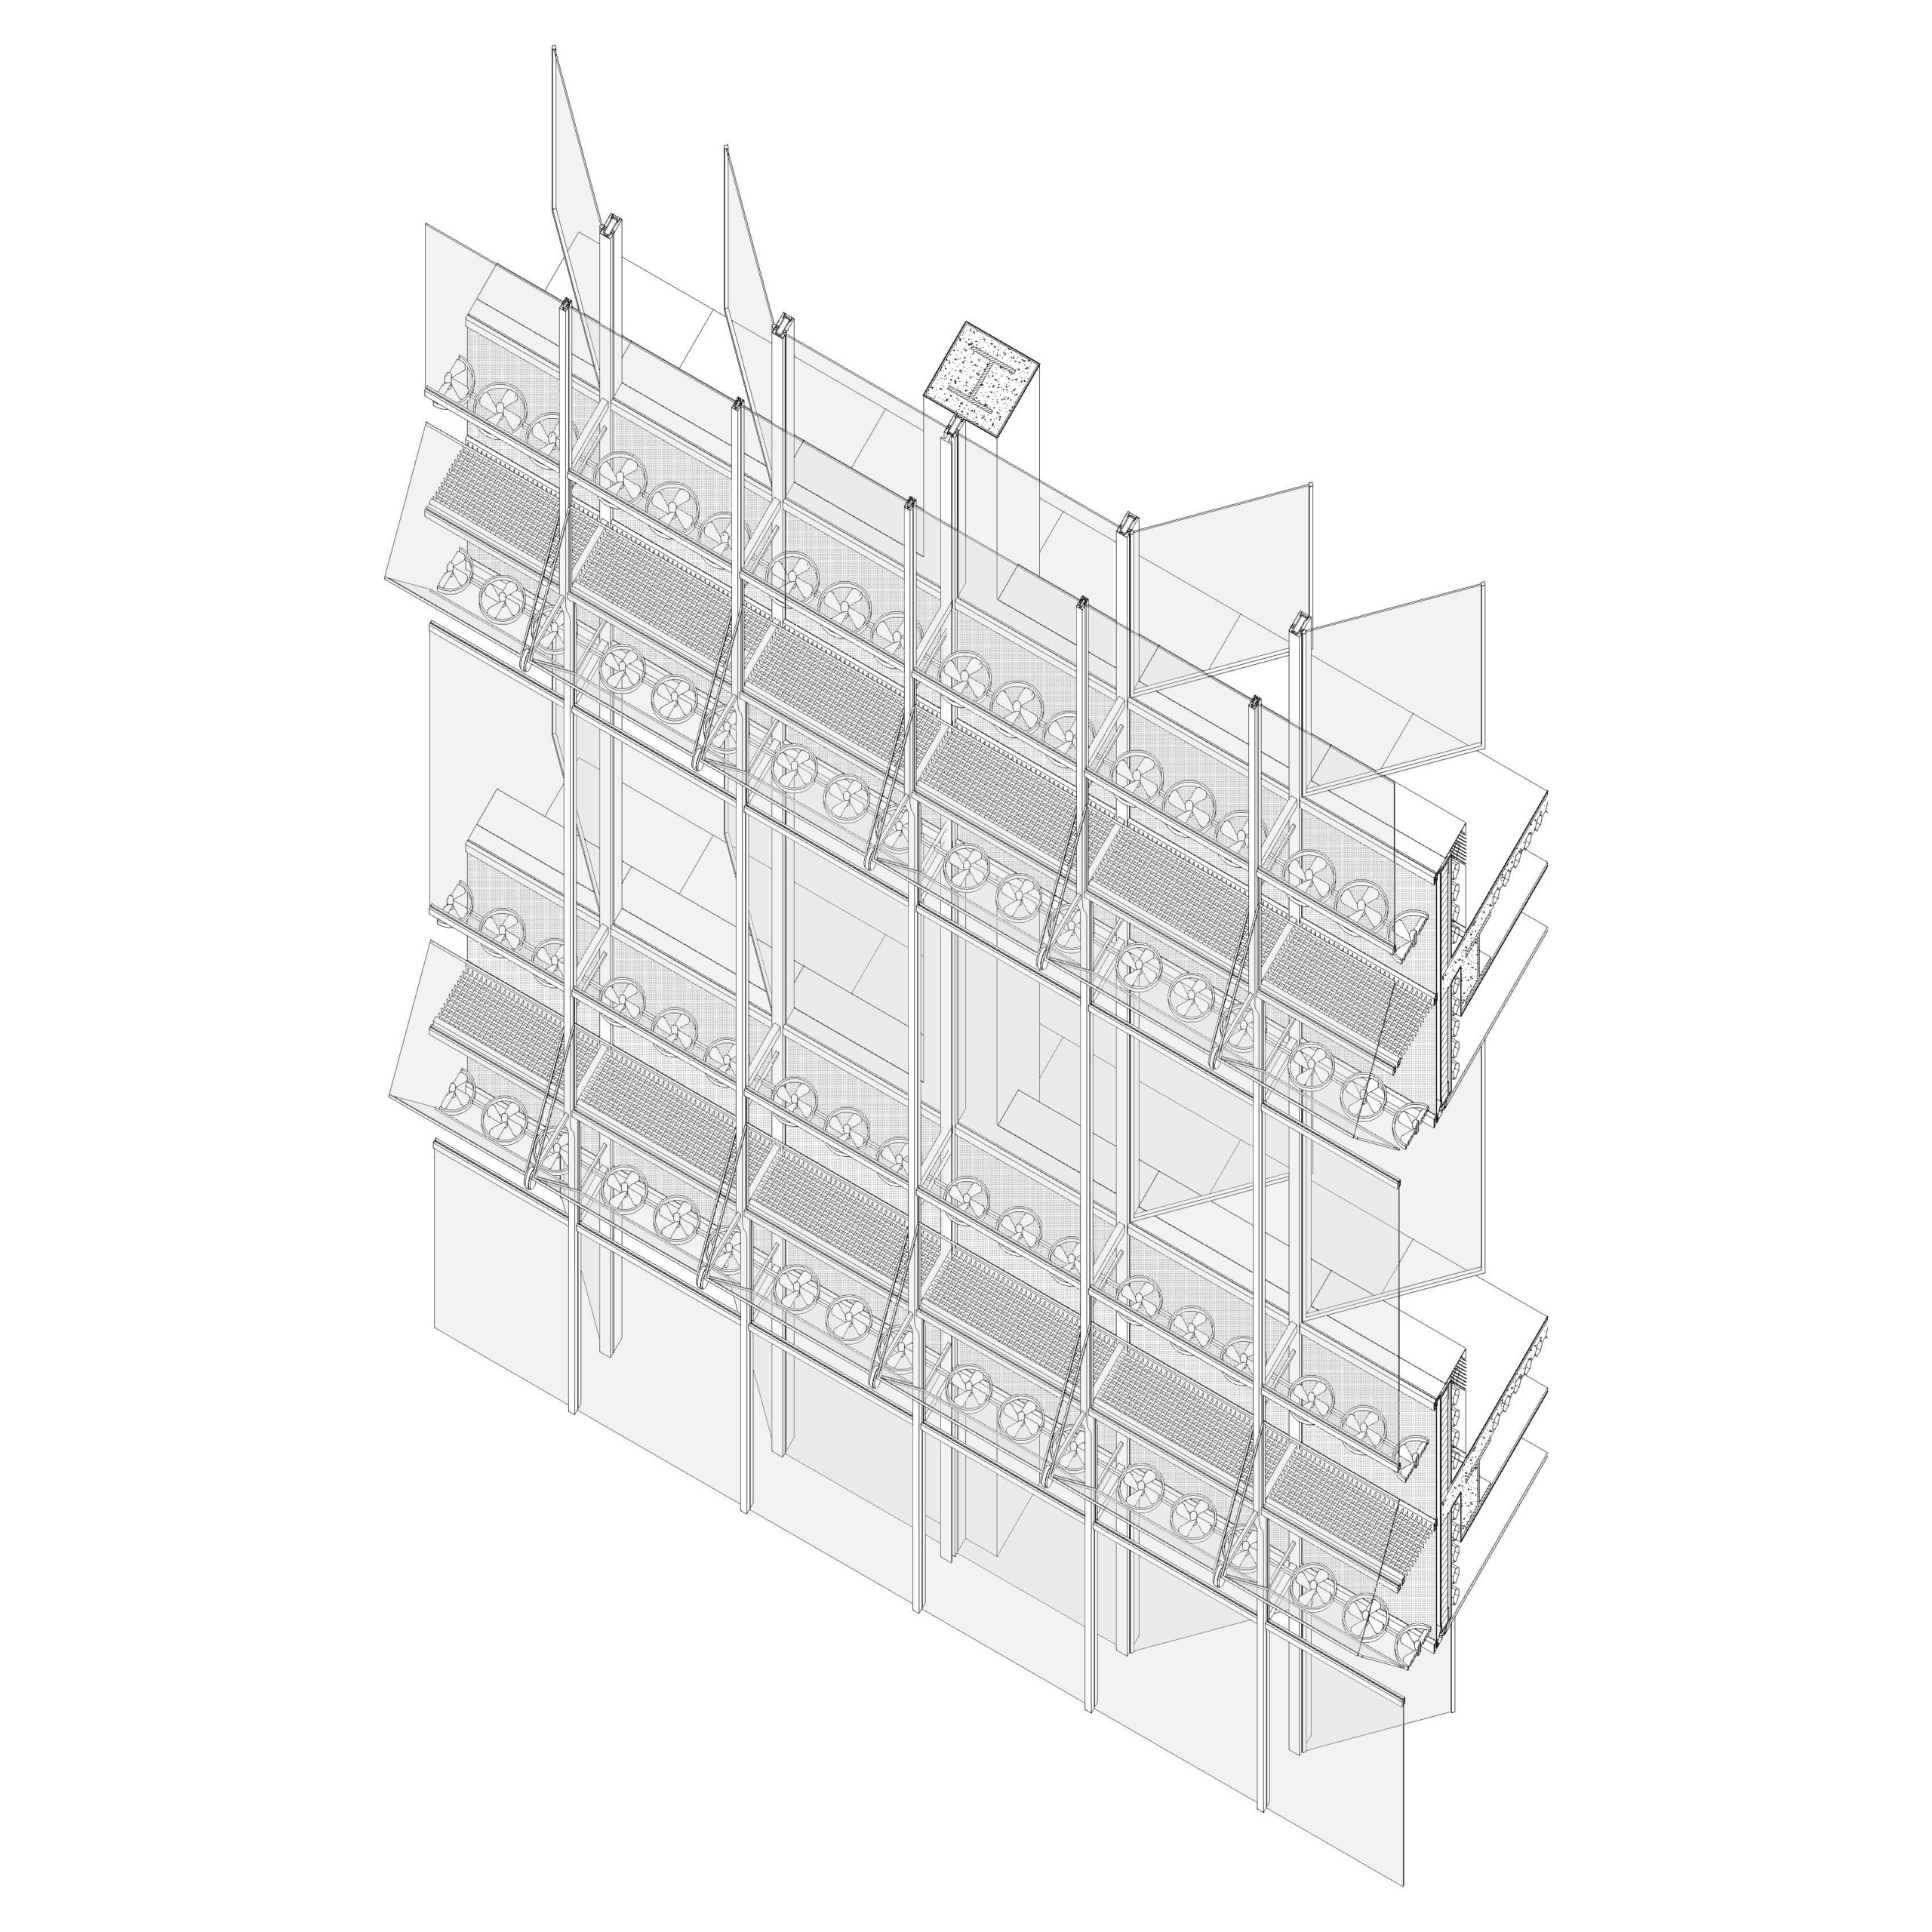 Black and white axonometric drawing of glass facade for a portion of three building floors